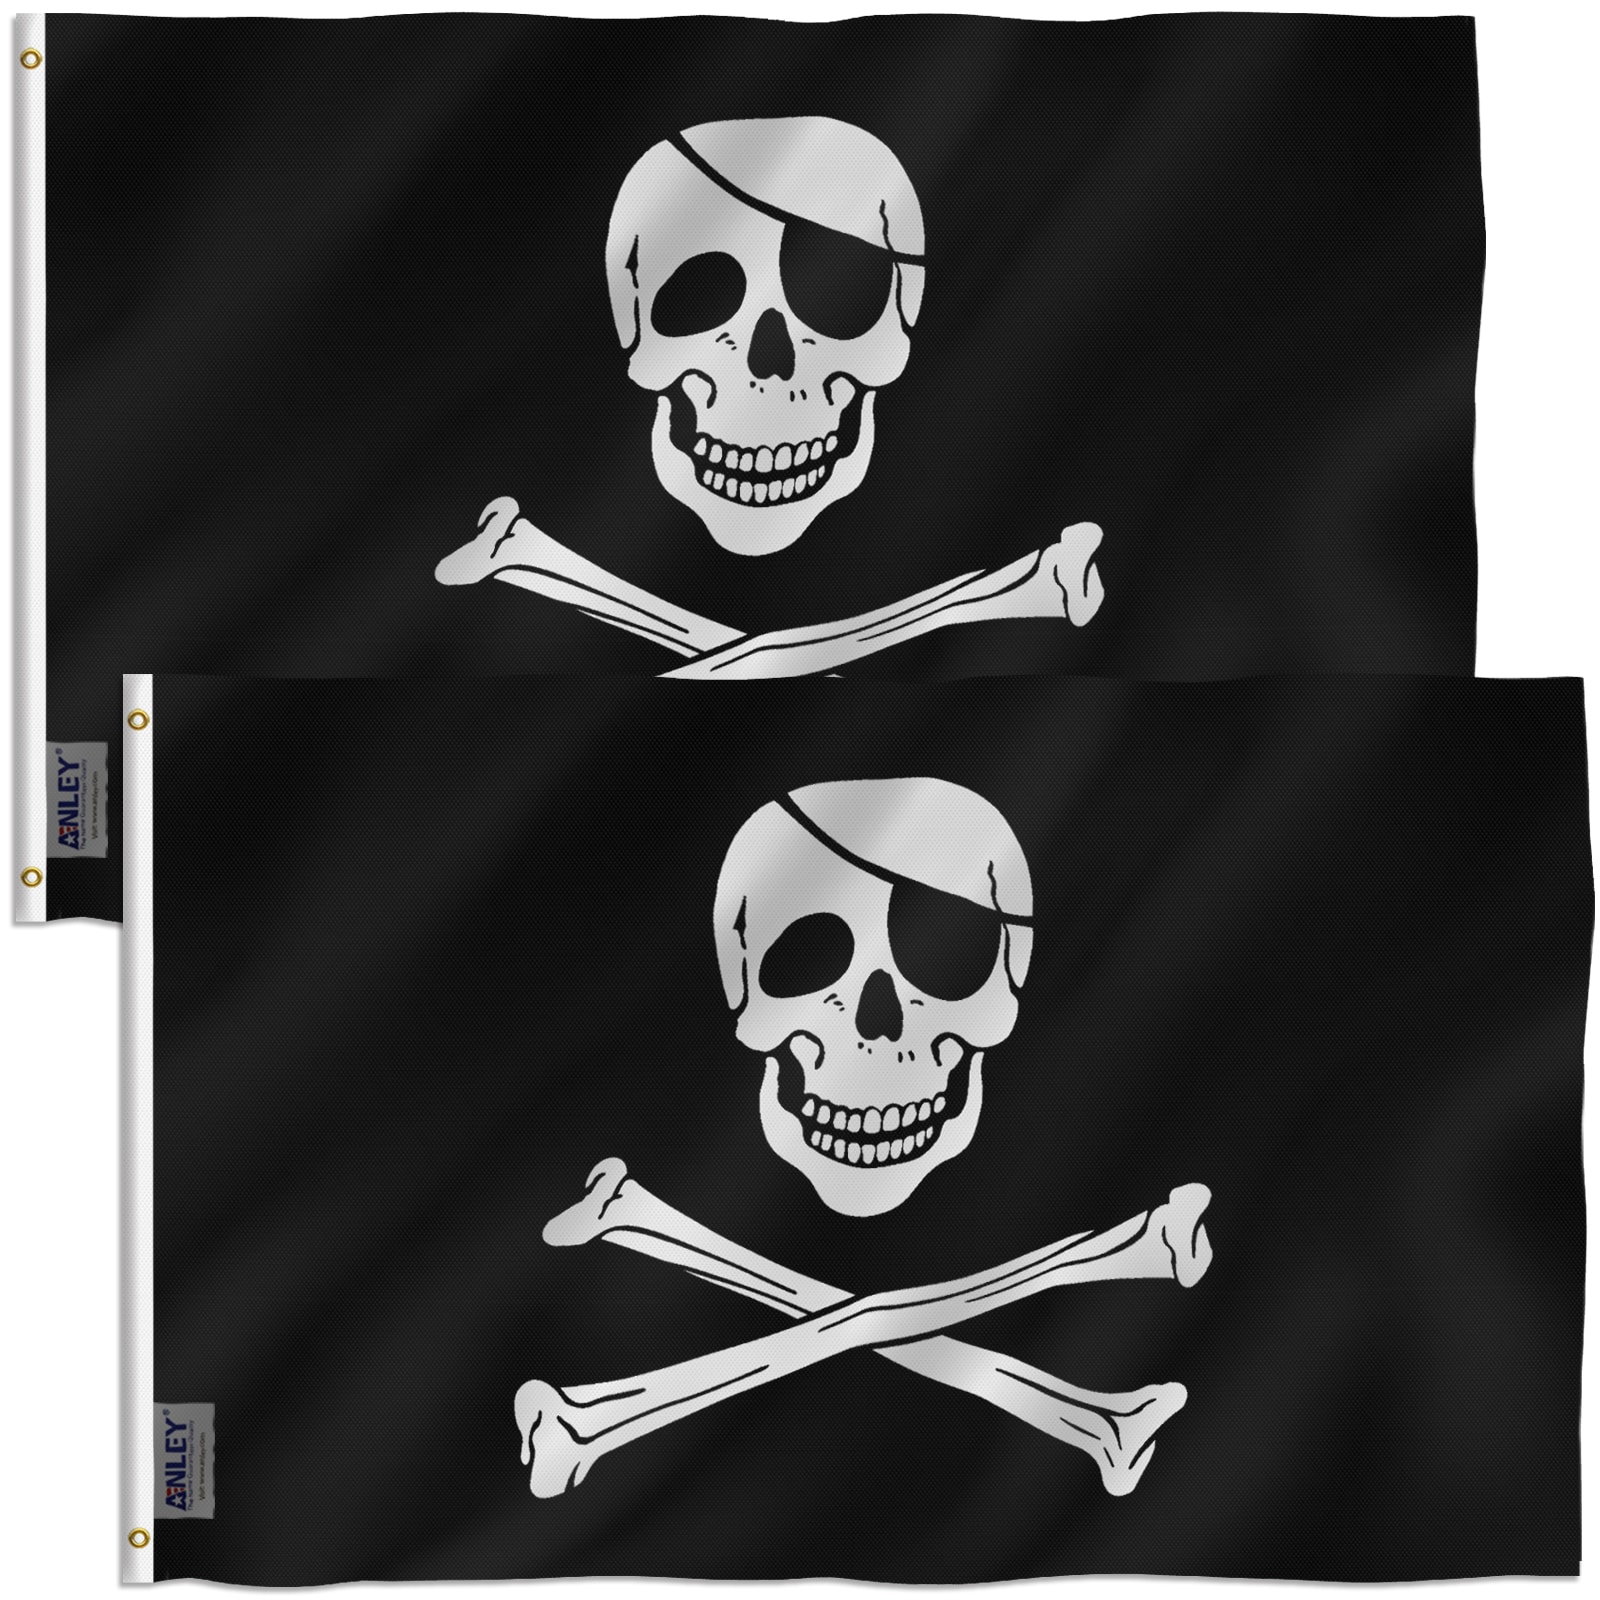 Jolly Roger Flag Pirate Flags Decorative Banners & Flags at Lowes.com